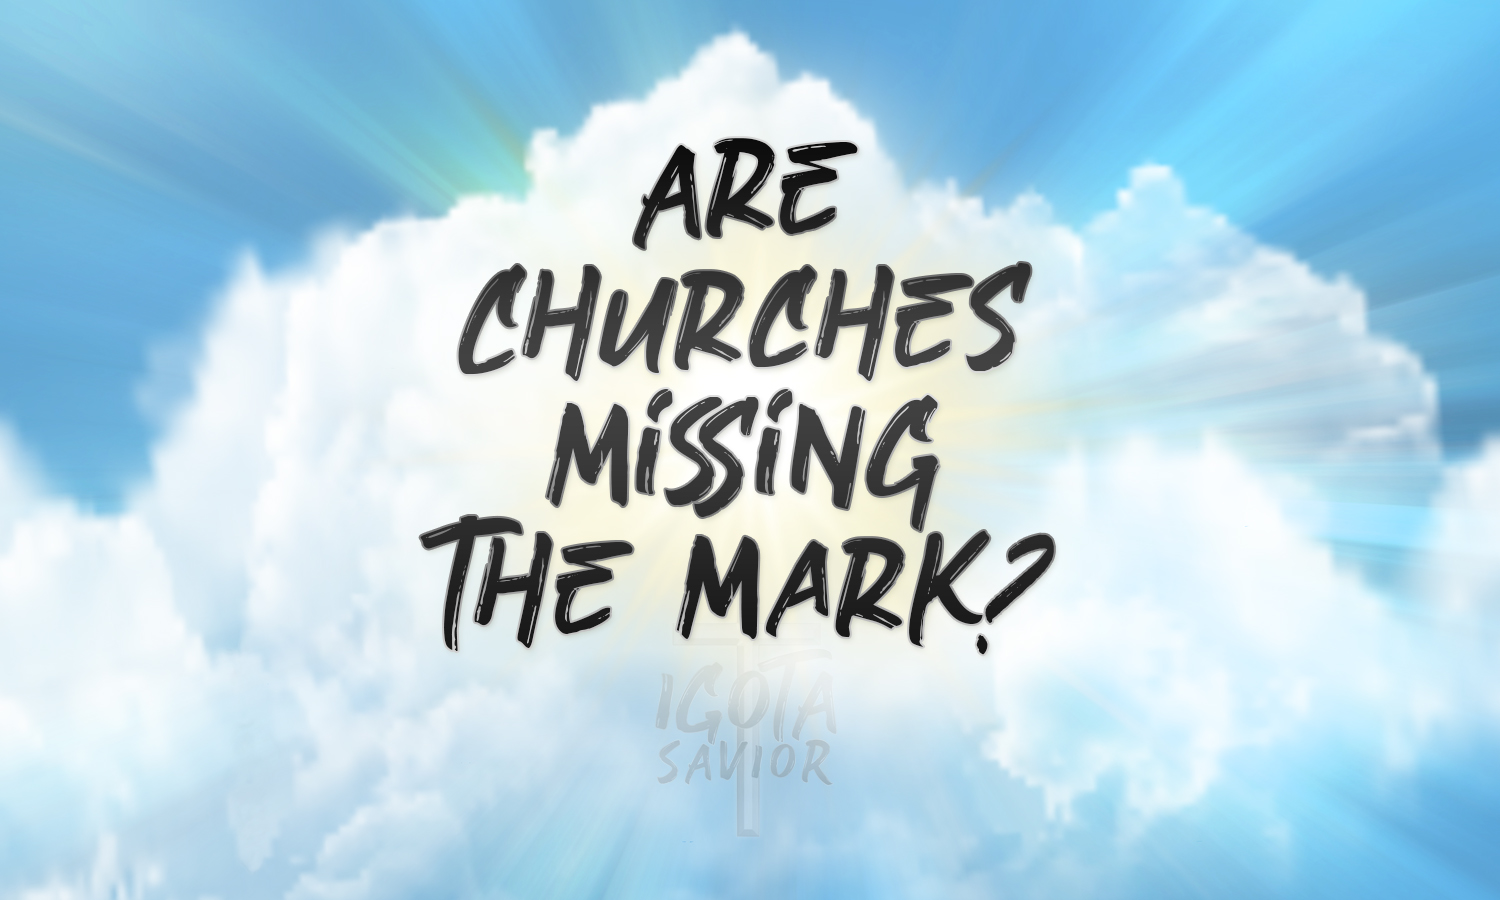 Are Churches Missing The Mark?